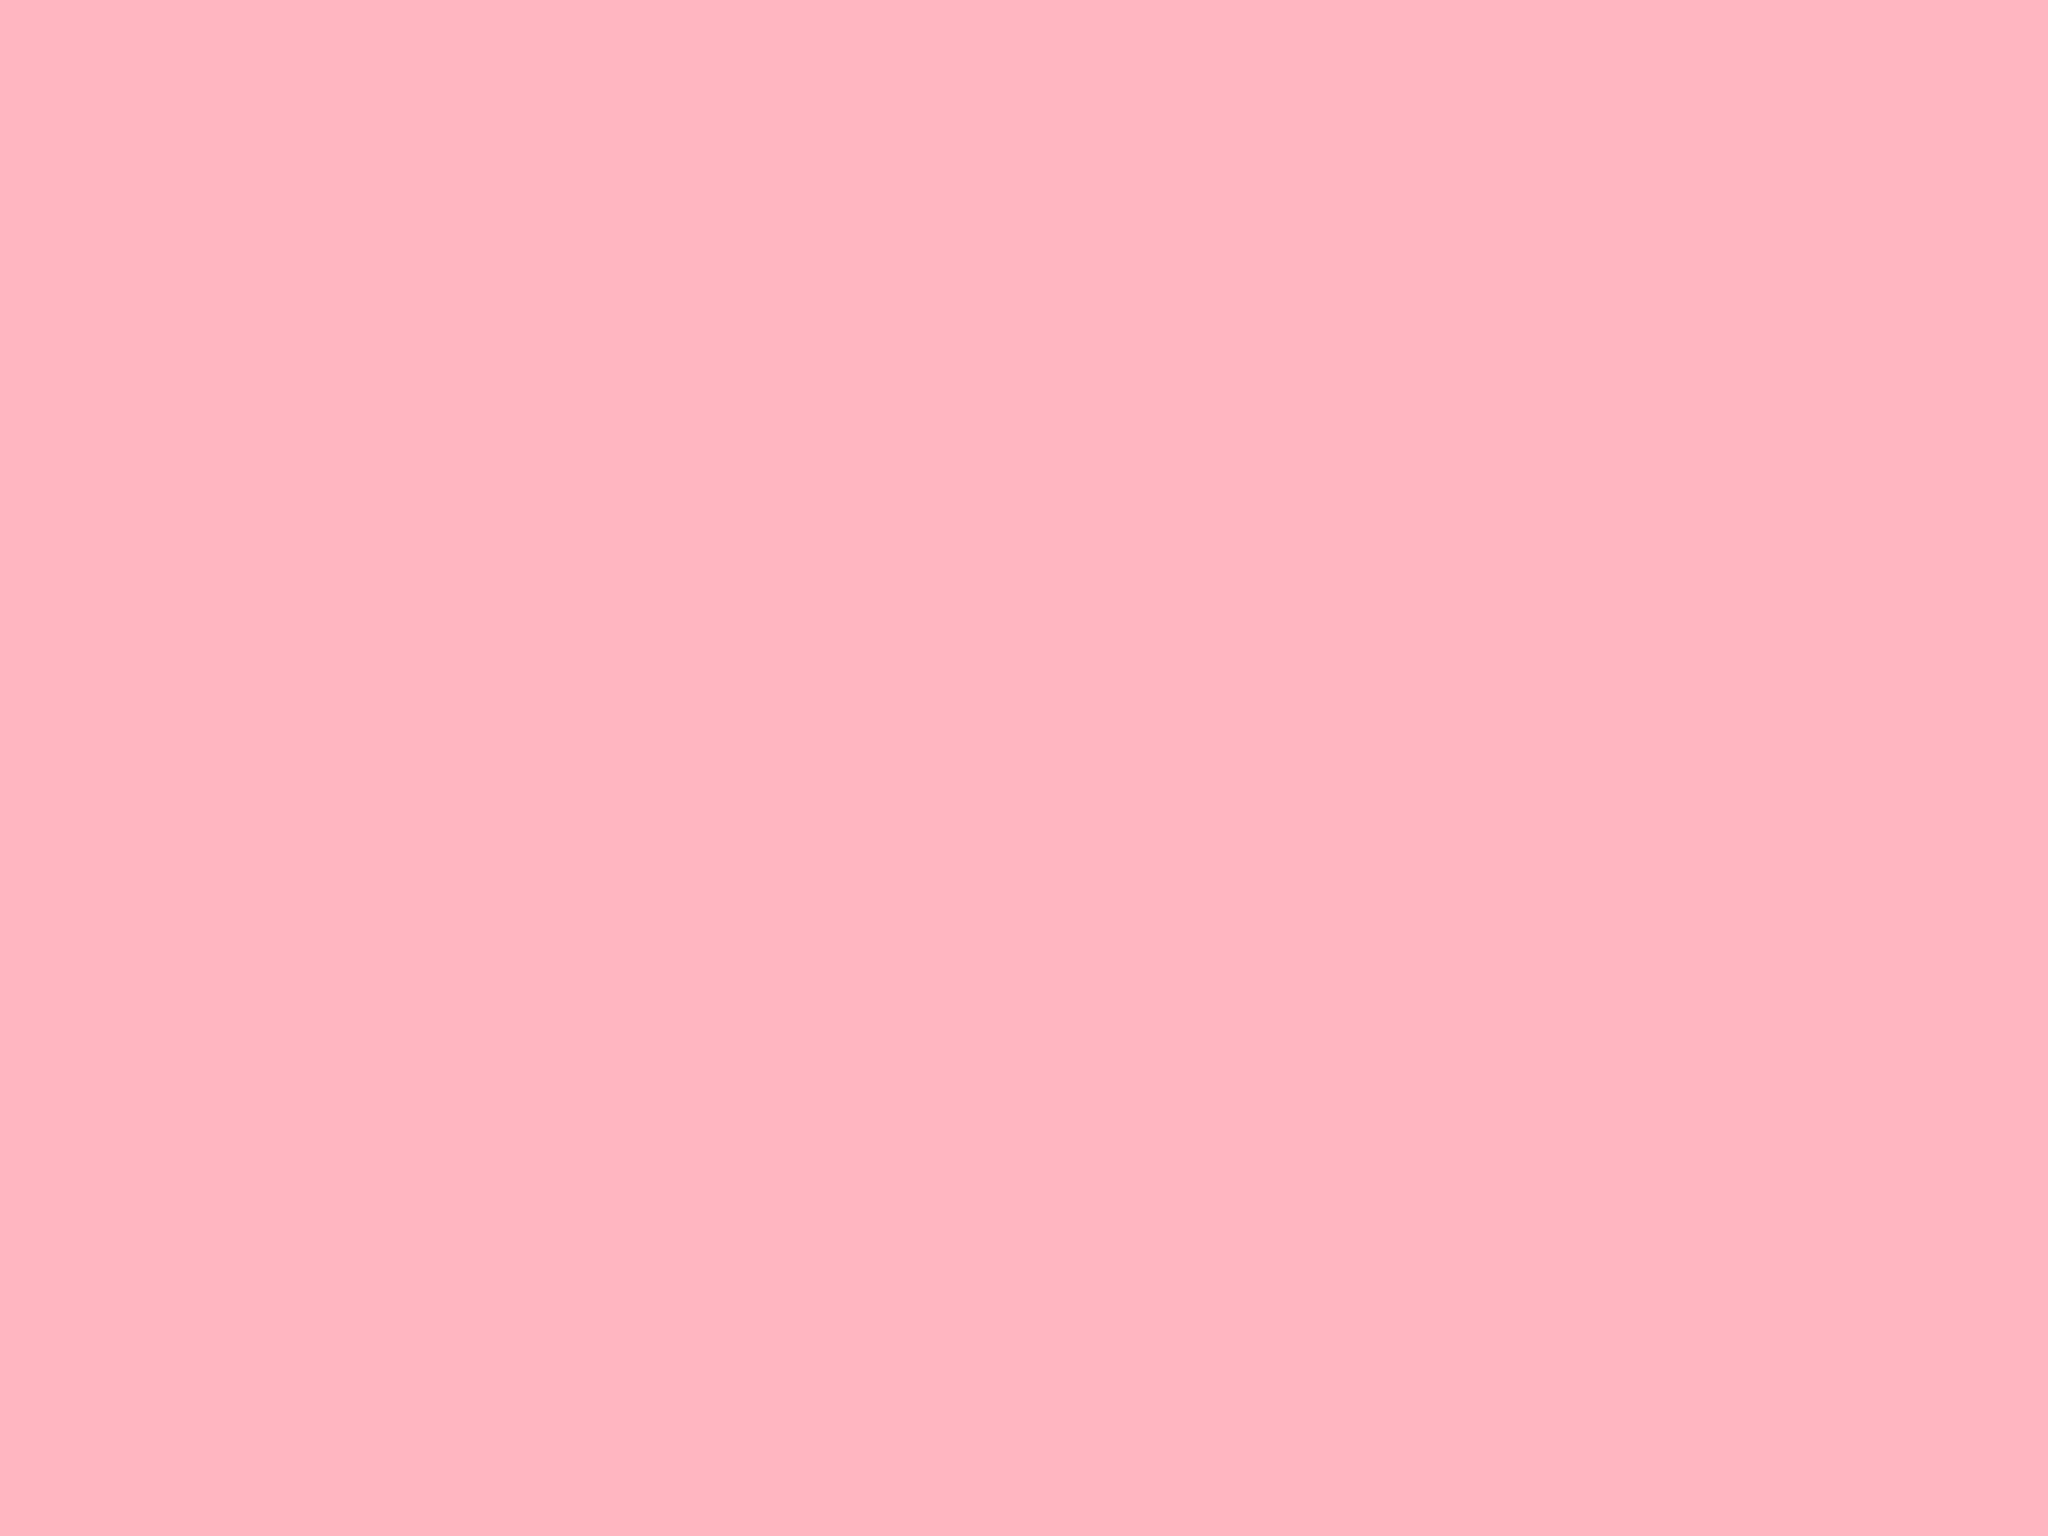 Free 2048x1536 resolution Light Pink solid color background view and